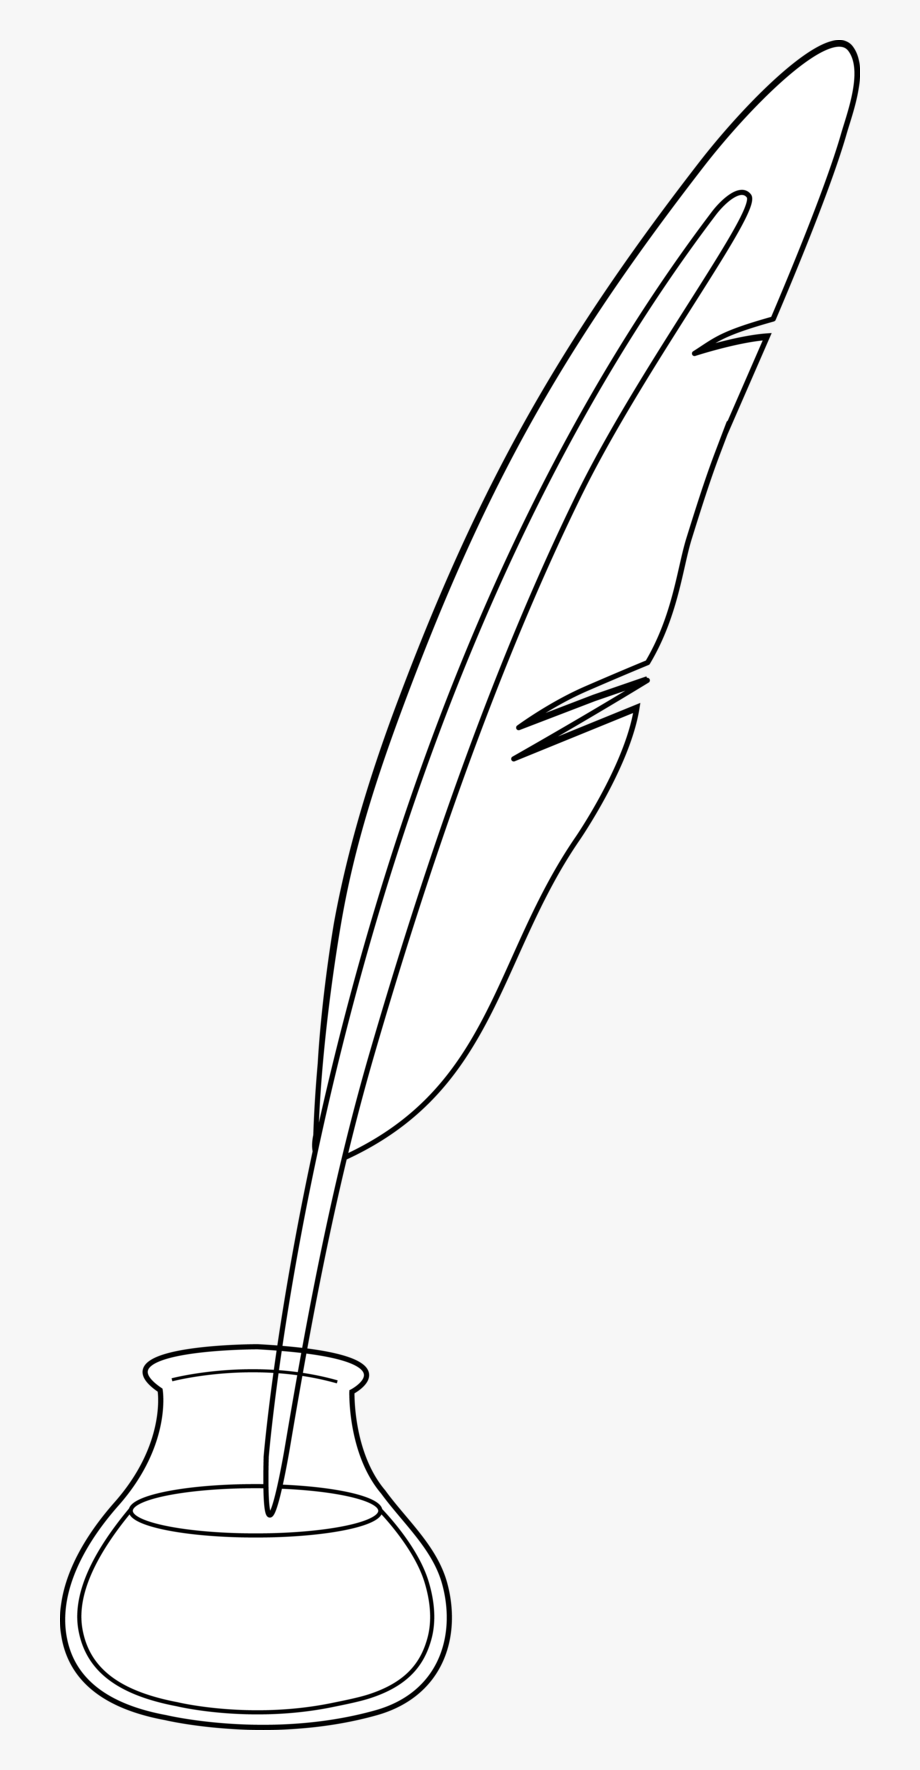 Quill Pen Clip Art Black And